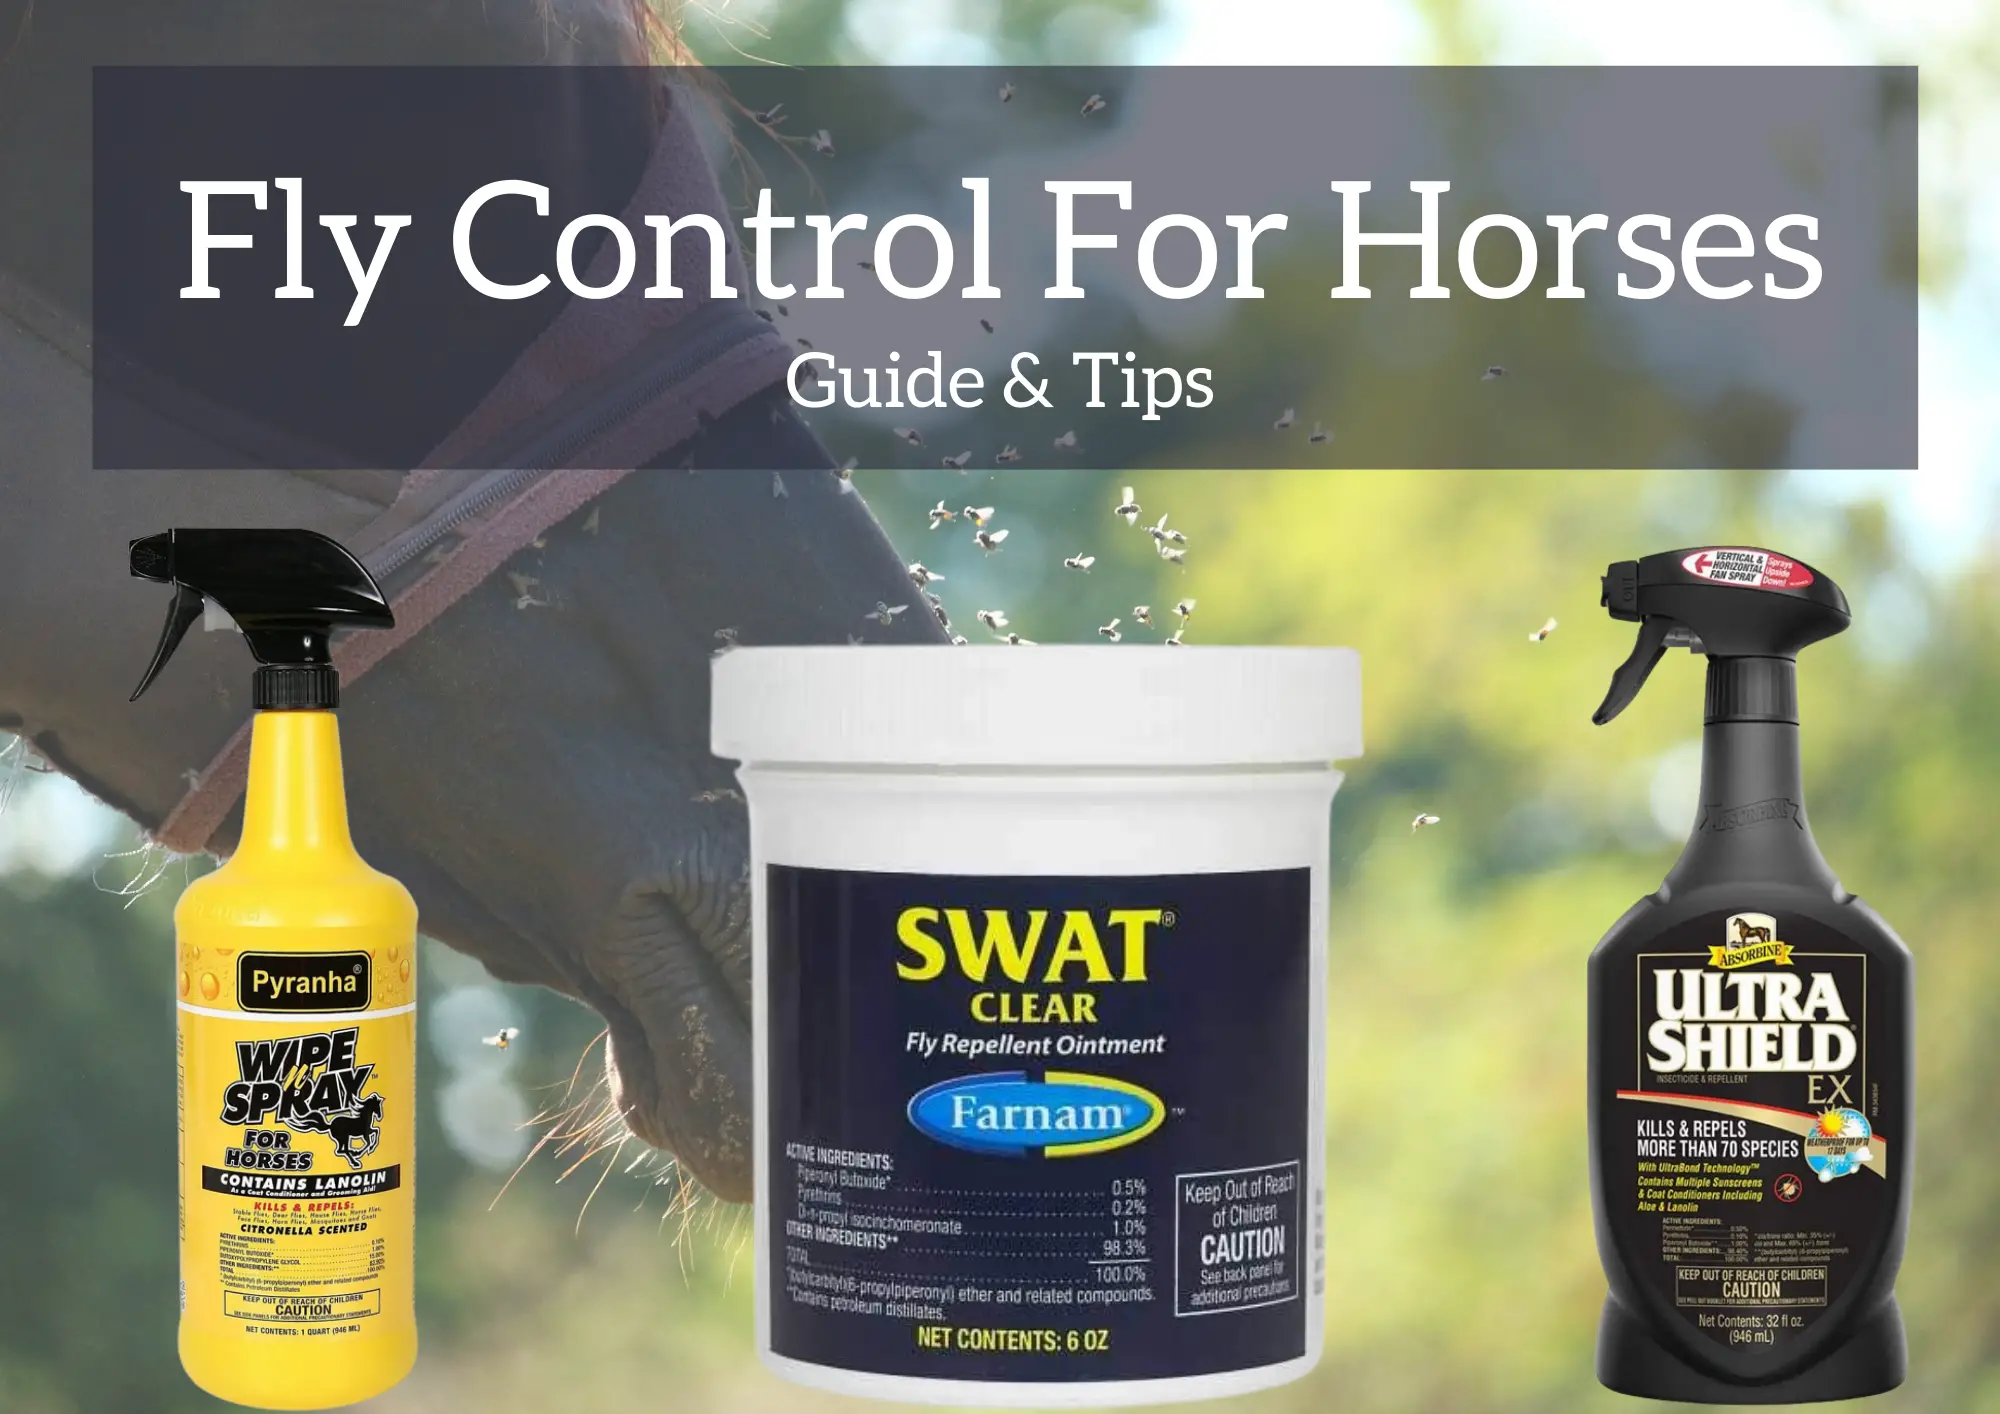 Fly Control For Horses